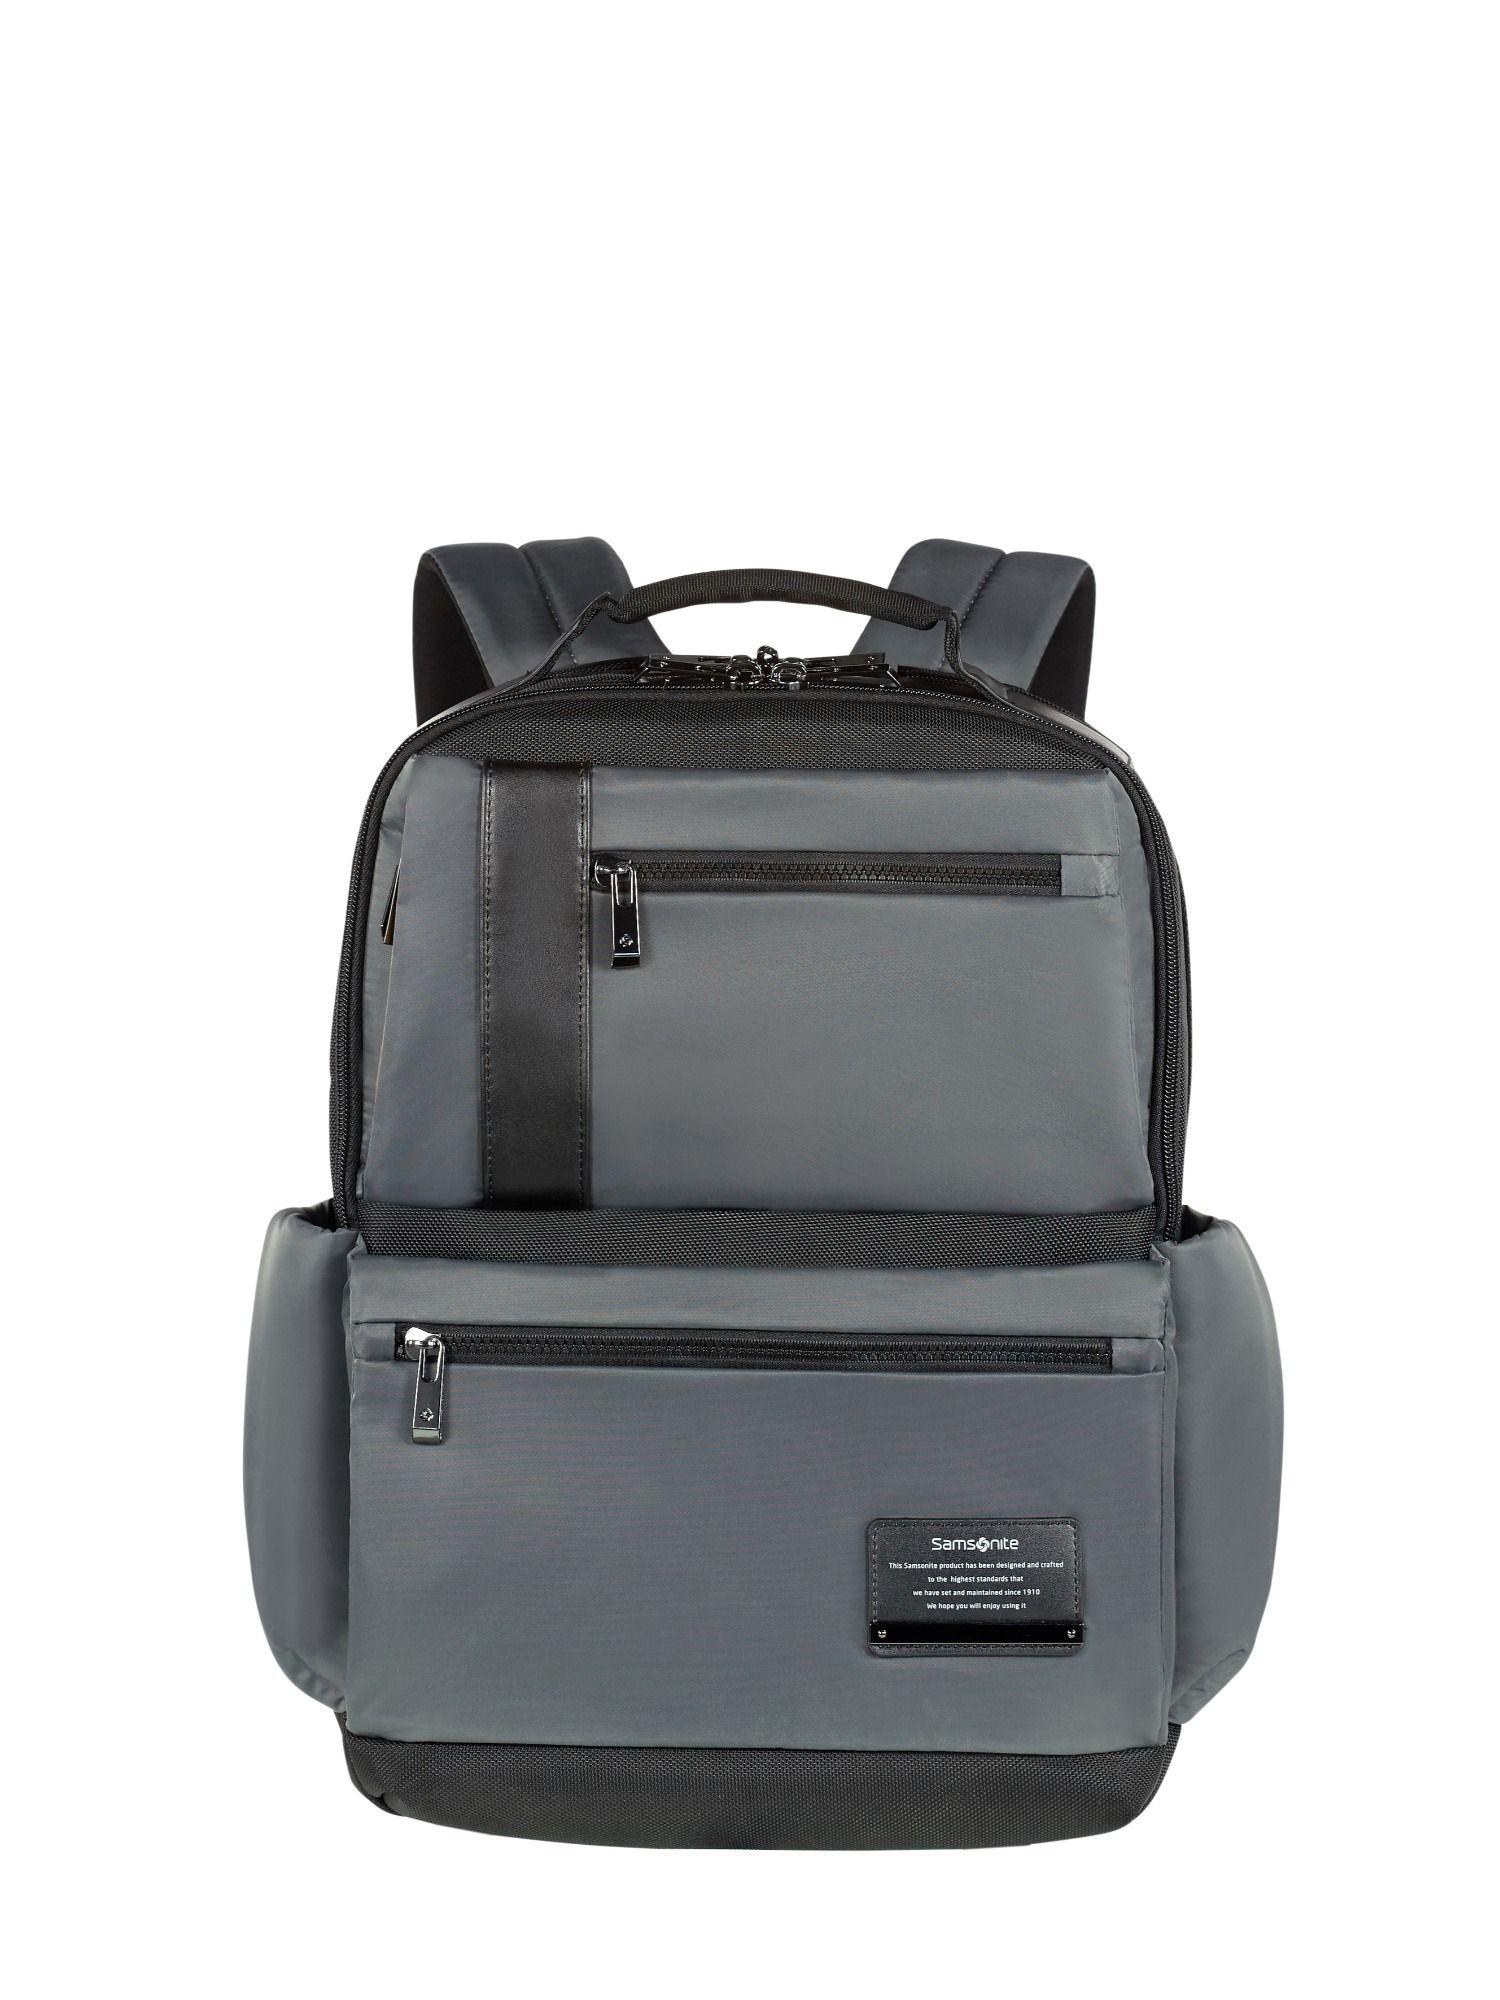 openroad laptop backpack -in-eclipse grey